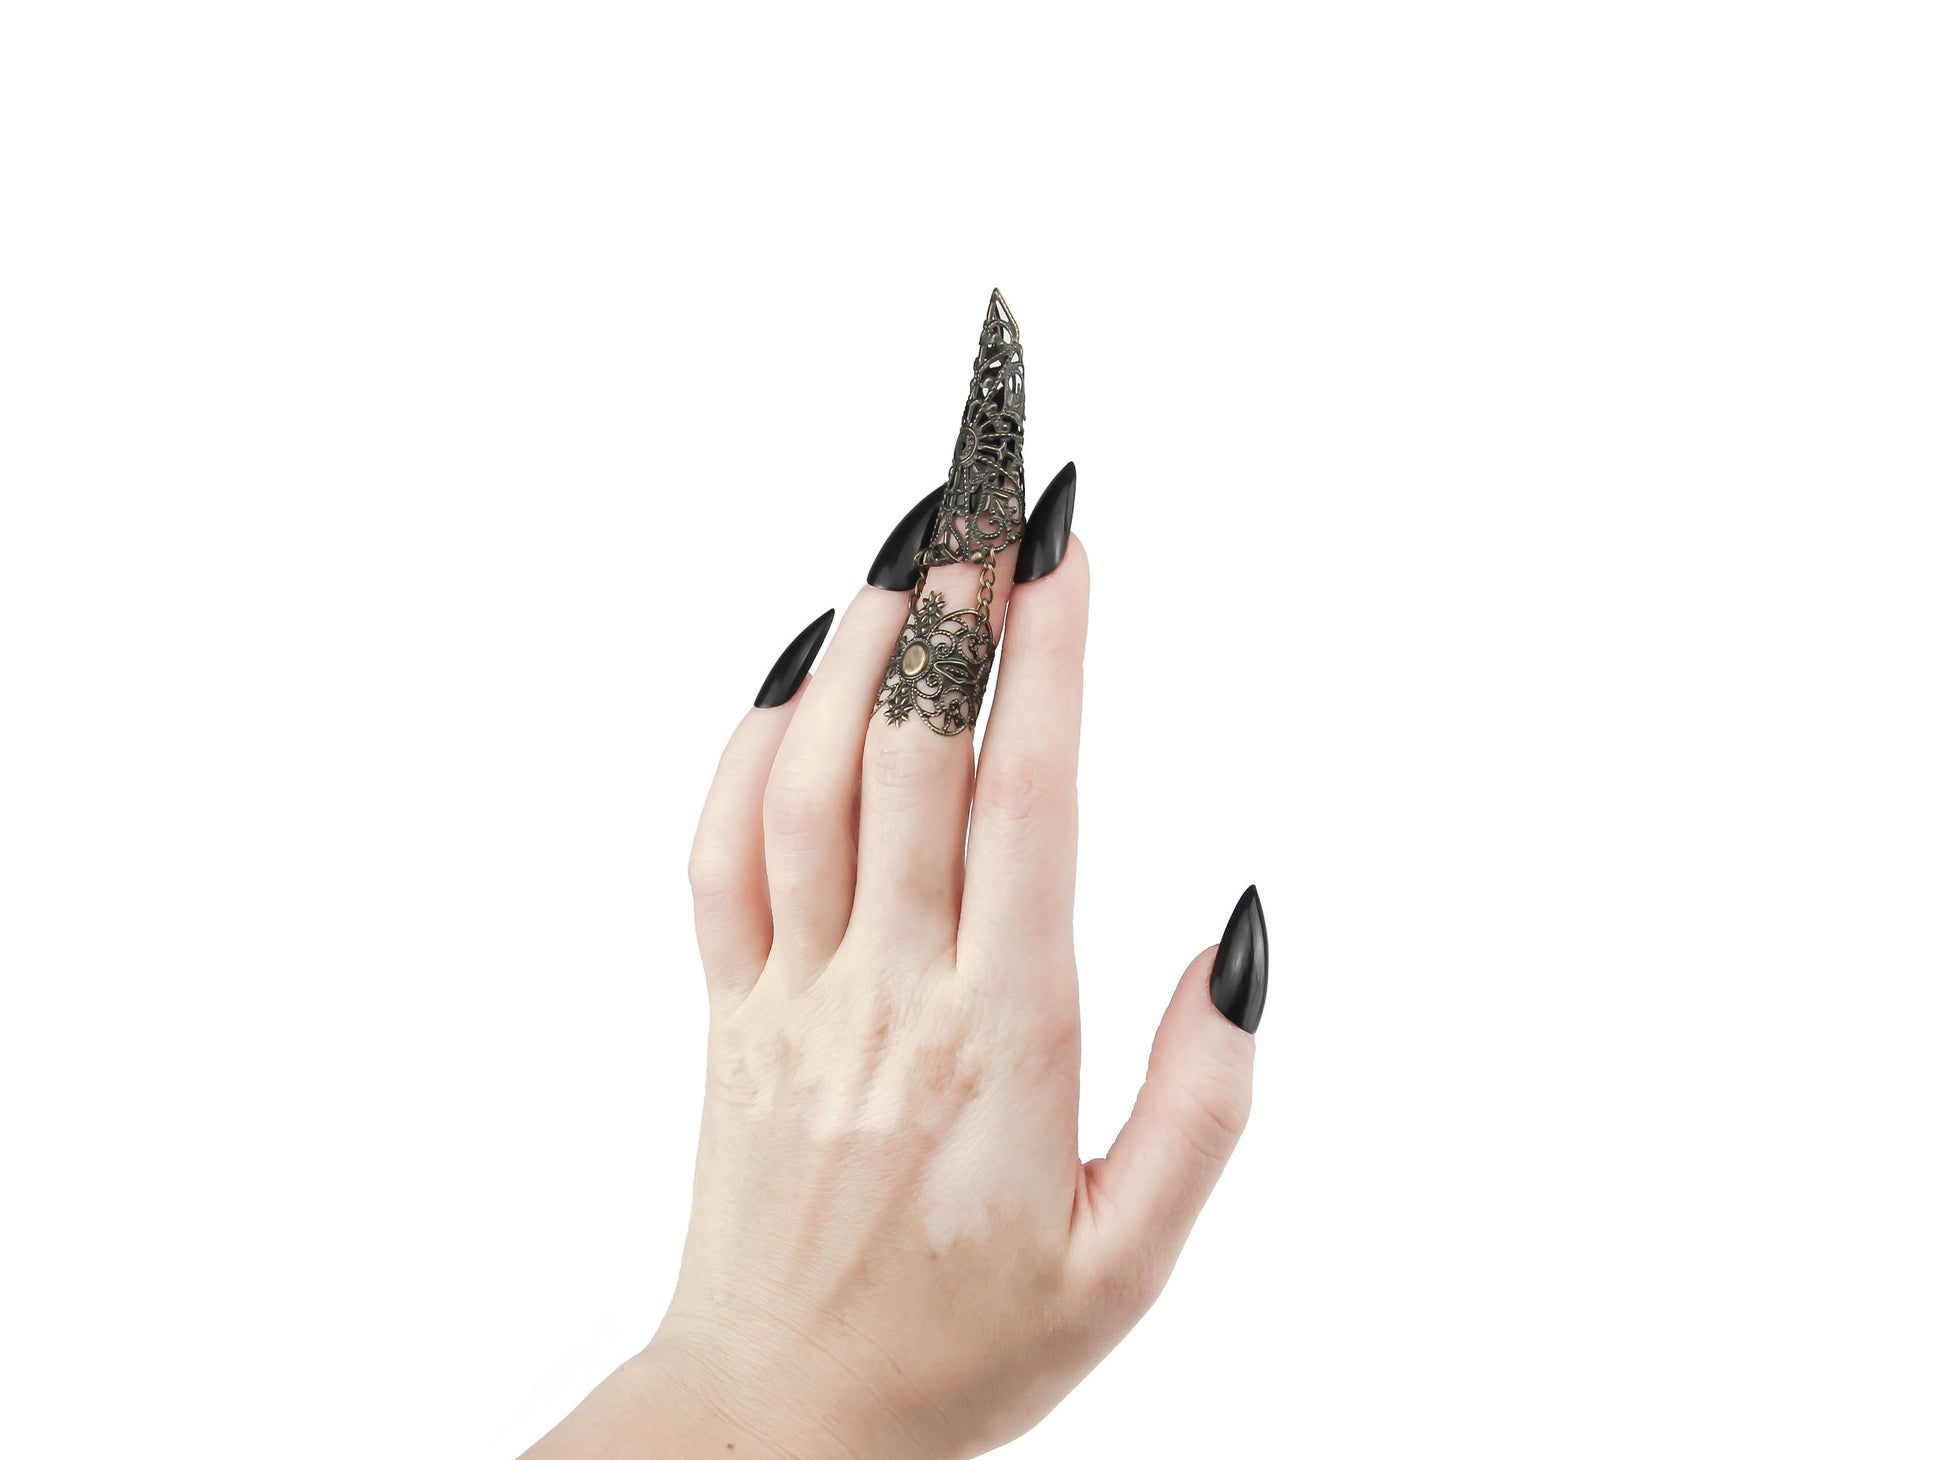 A hand with sleek black nails elegantly showcases a Myril Jewels claw ring on the middle finger, encapsulating the essence of neo-goth style. The ring's lace-like, intricate metalwork embodies dark-avantgarde fashion, making it a quintessential accessory for lovers of gothic and alternative aesthetics. Ideal for Halloween adornment, its punk jewelry vibe is subtle enough for everyday wear yet bold for the spotlight at rave parties and festivals. This piece is a striking representation of the gothic-chic